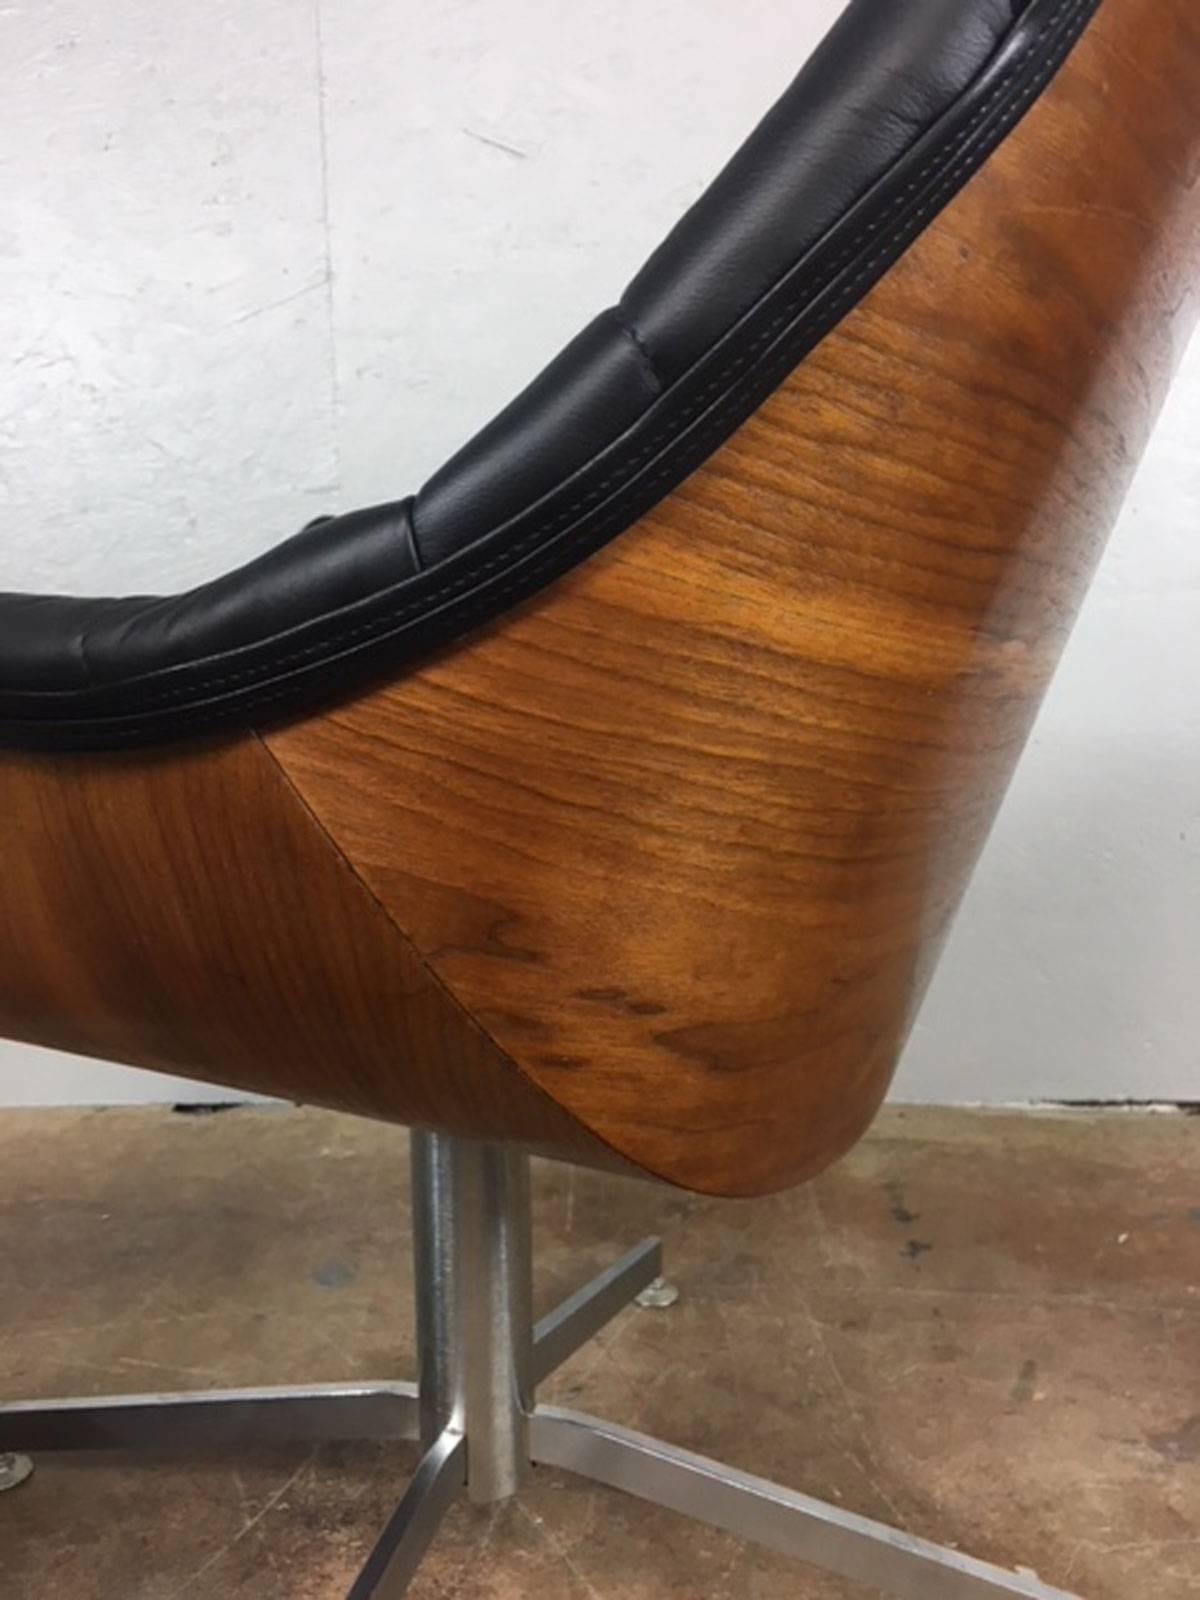 Black leather diamond patterned lounge chair in walnut. New black leather. Very unique and unusual chair. Refinished and refurbished. Measures: Seat height is 16 inches.